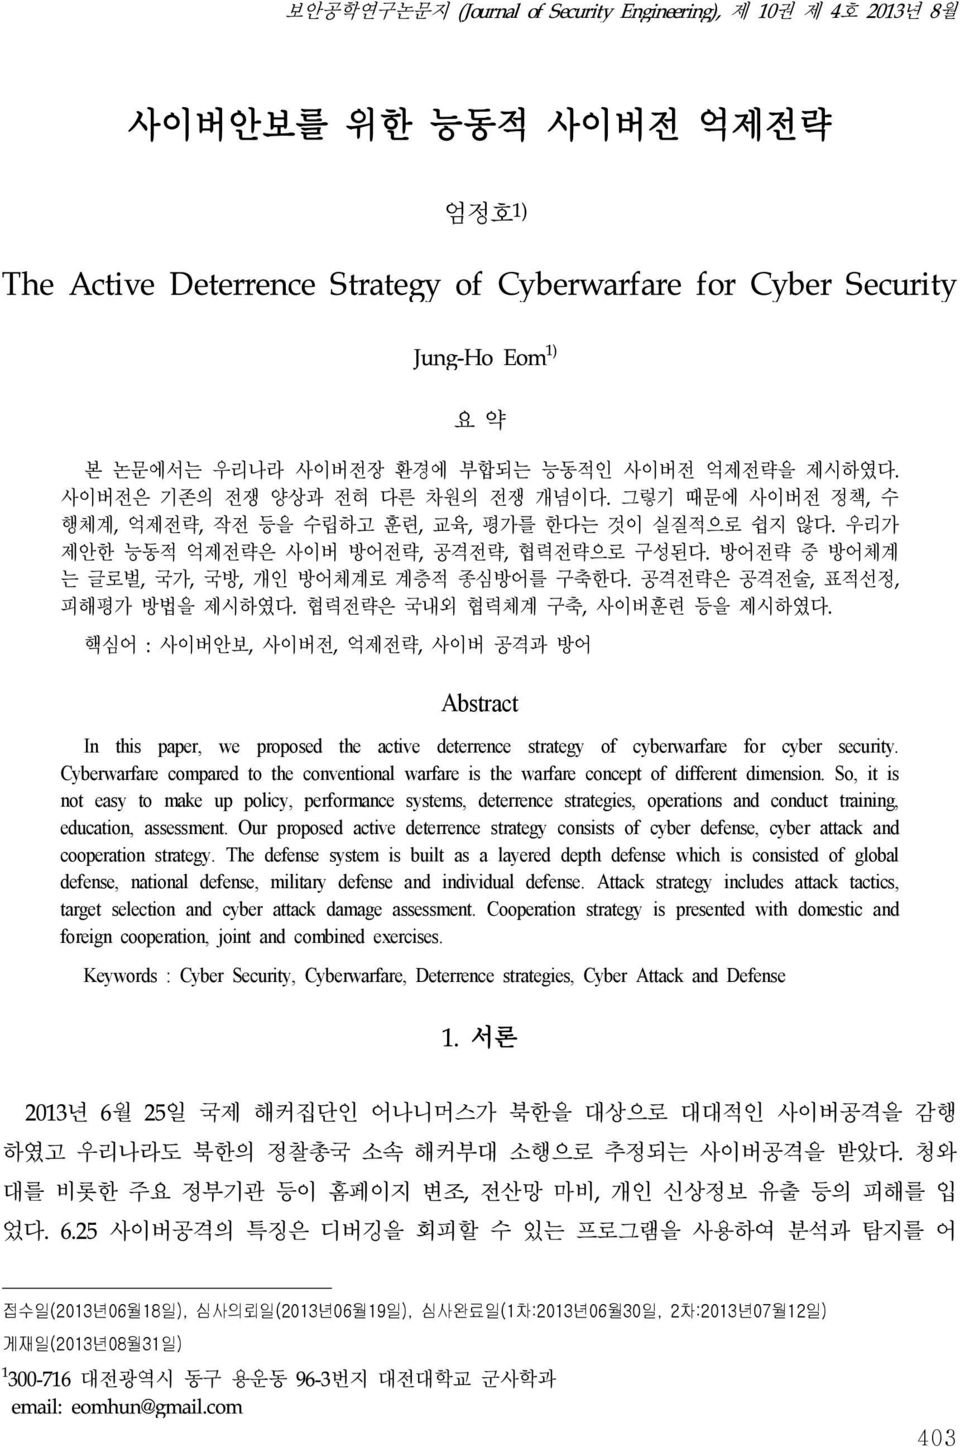 strategy of cyberwarfare for cyber security. Cyberwarfare compared to the conventional warfare is the warfare concept of different dimension.